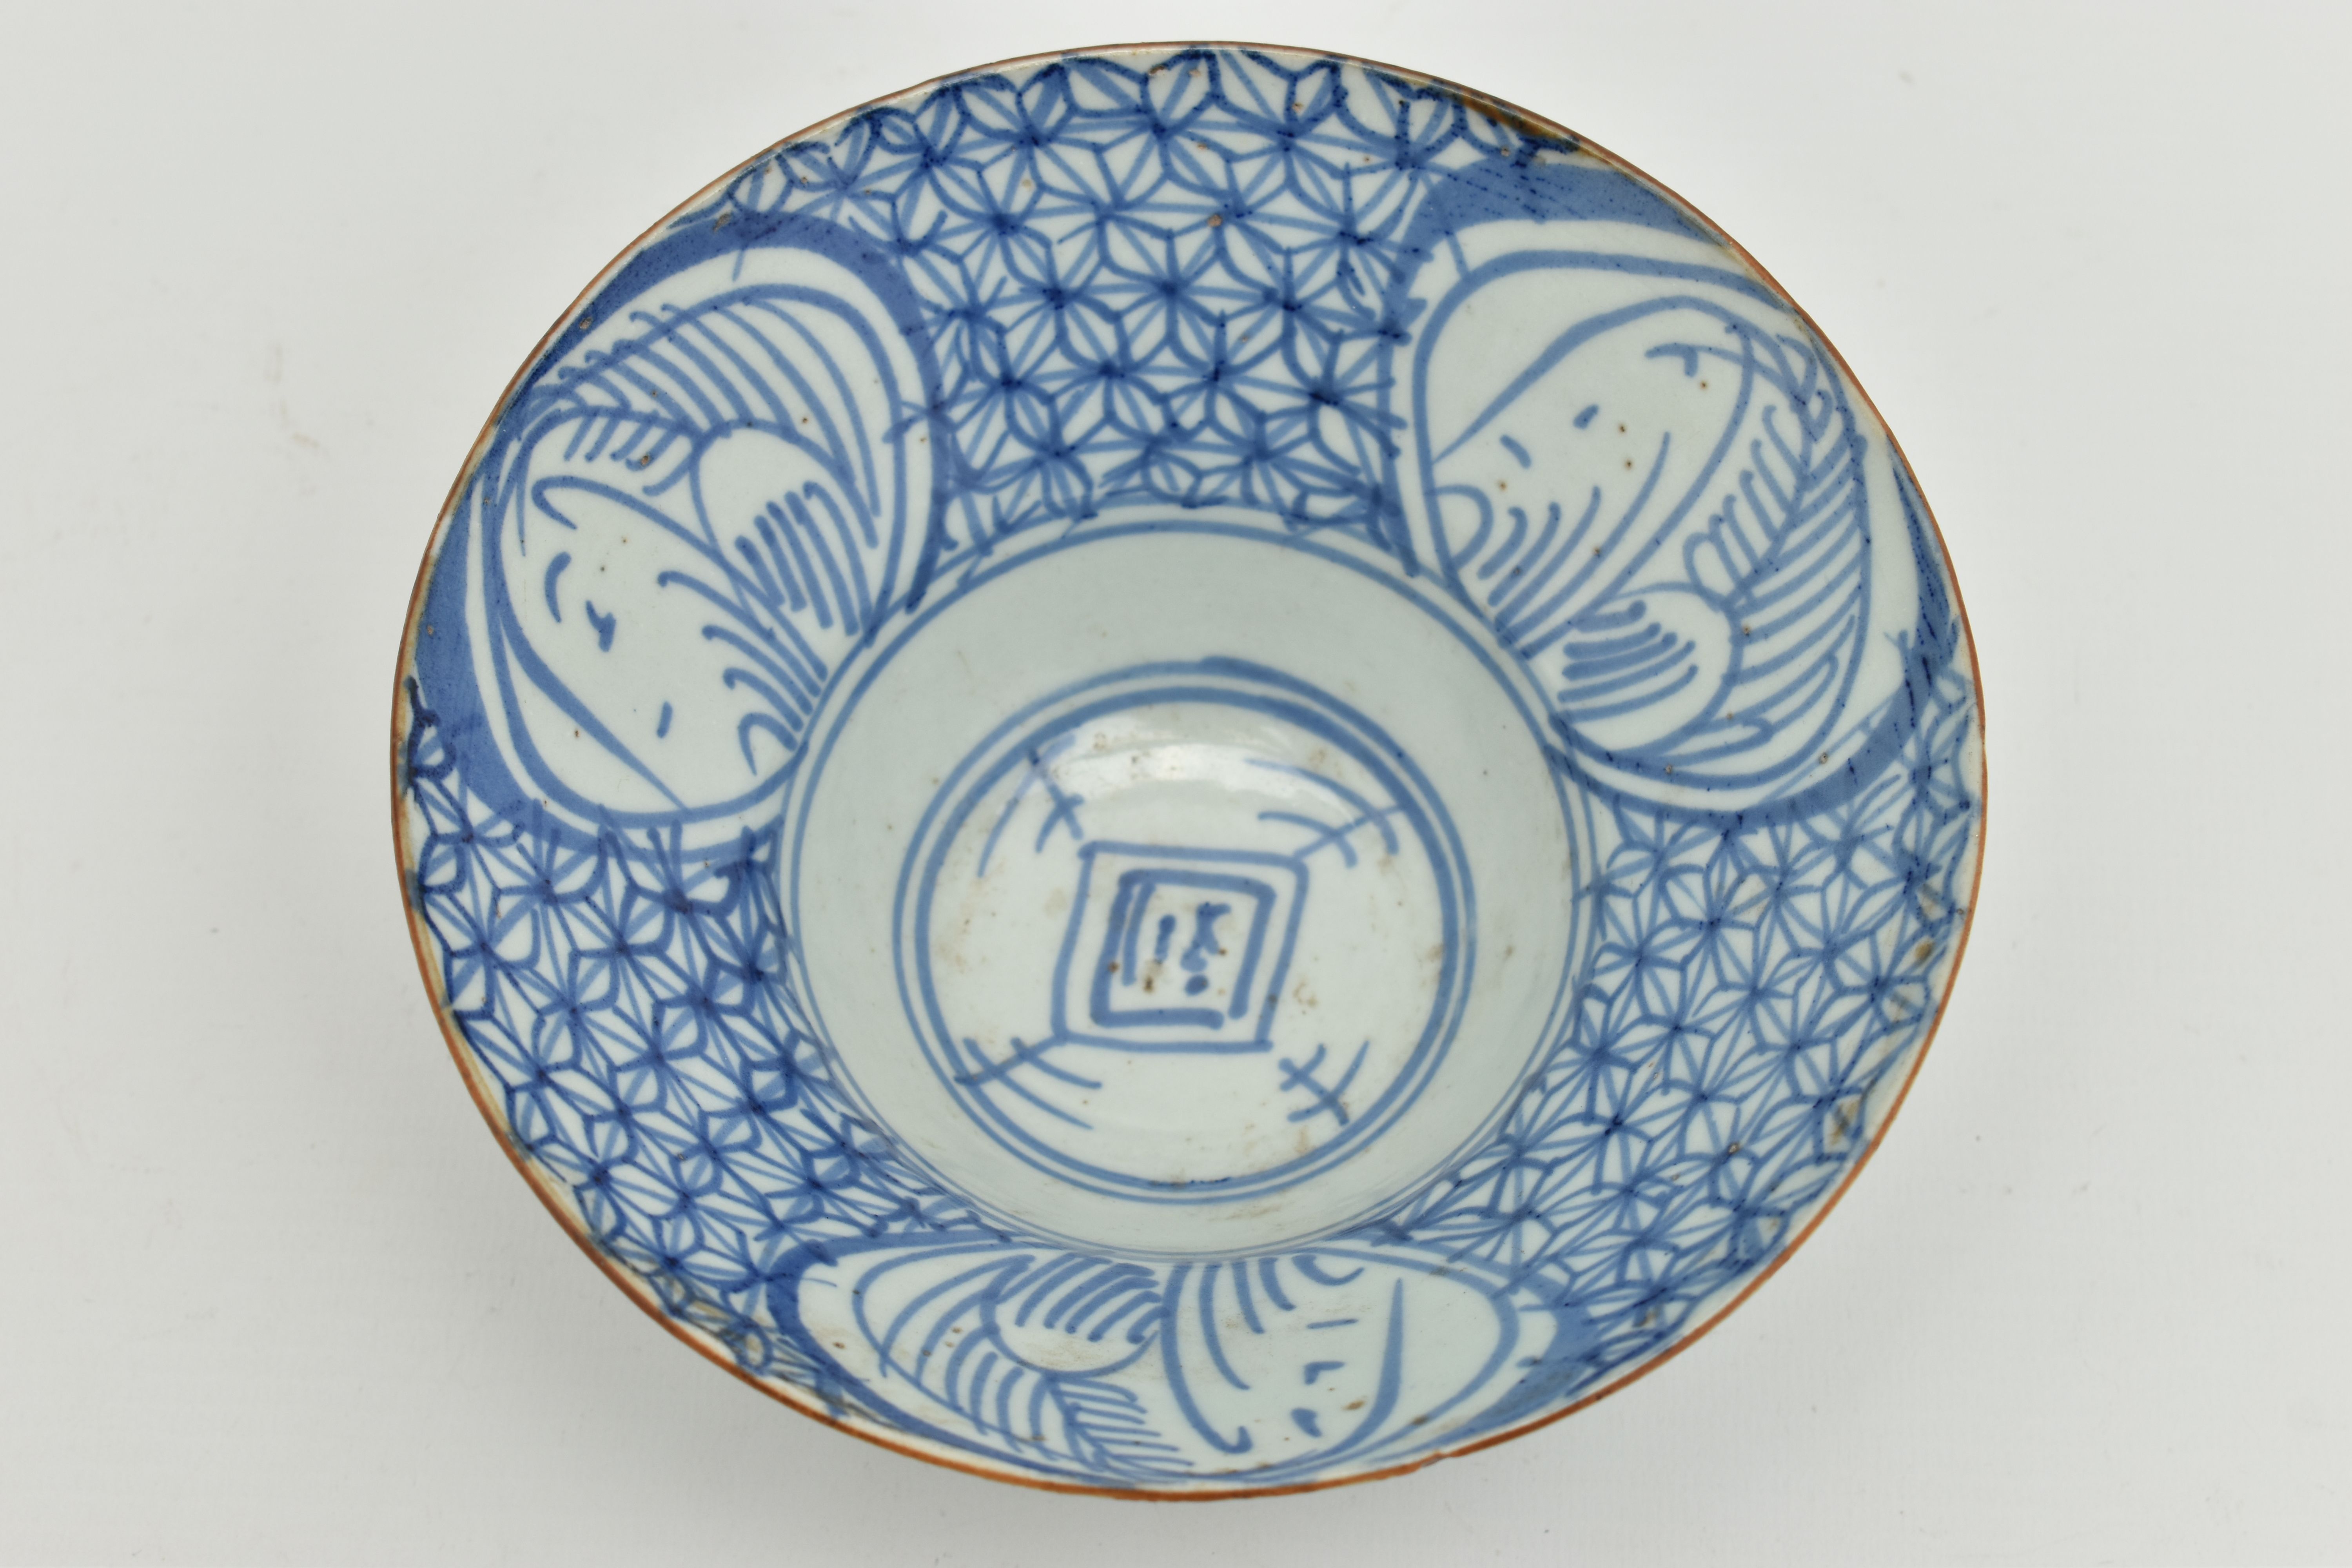 A LATE 18TH / EARLY 19TH CENTURY CHINESE PORCELAIN BLUE AND WHITE PORCELAIN TEK SING CARGO TYPE - Image 2 of 8